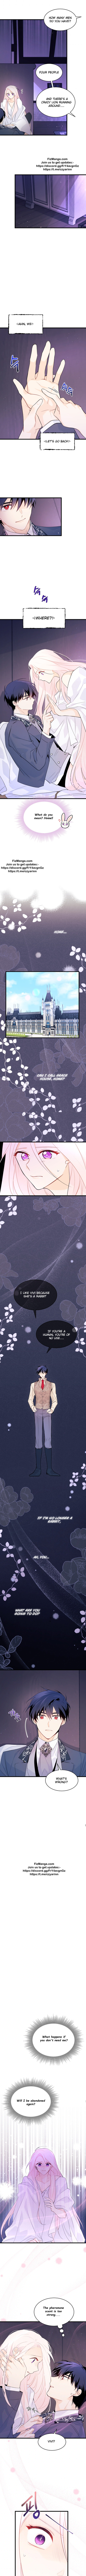 The Symbiotic Relationship Between A Rabbit and A Black Panther - Chapter 37.5 Page 2